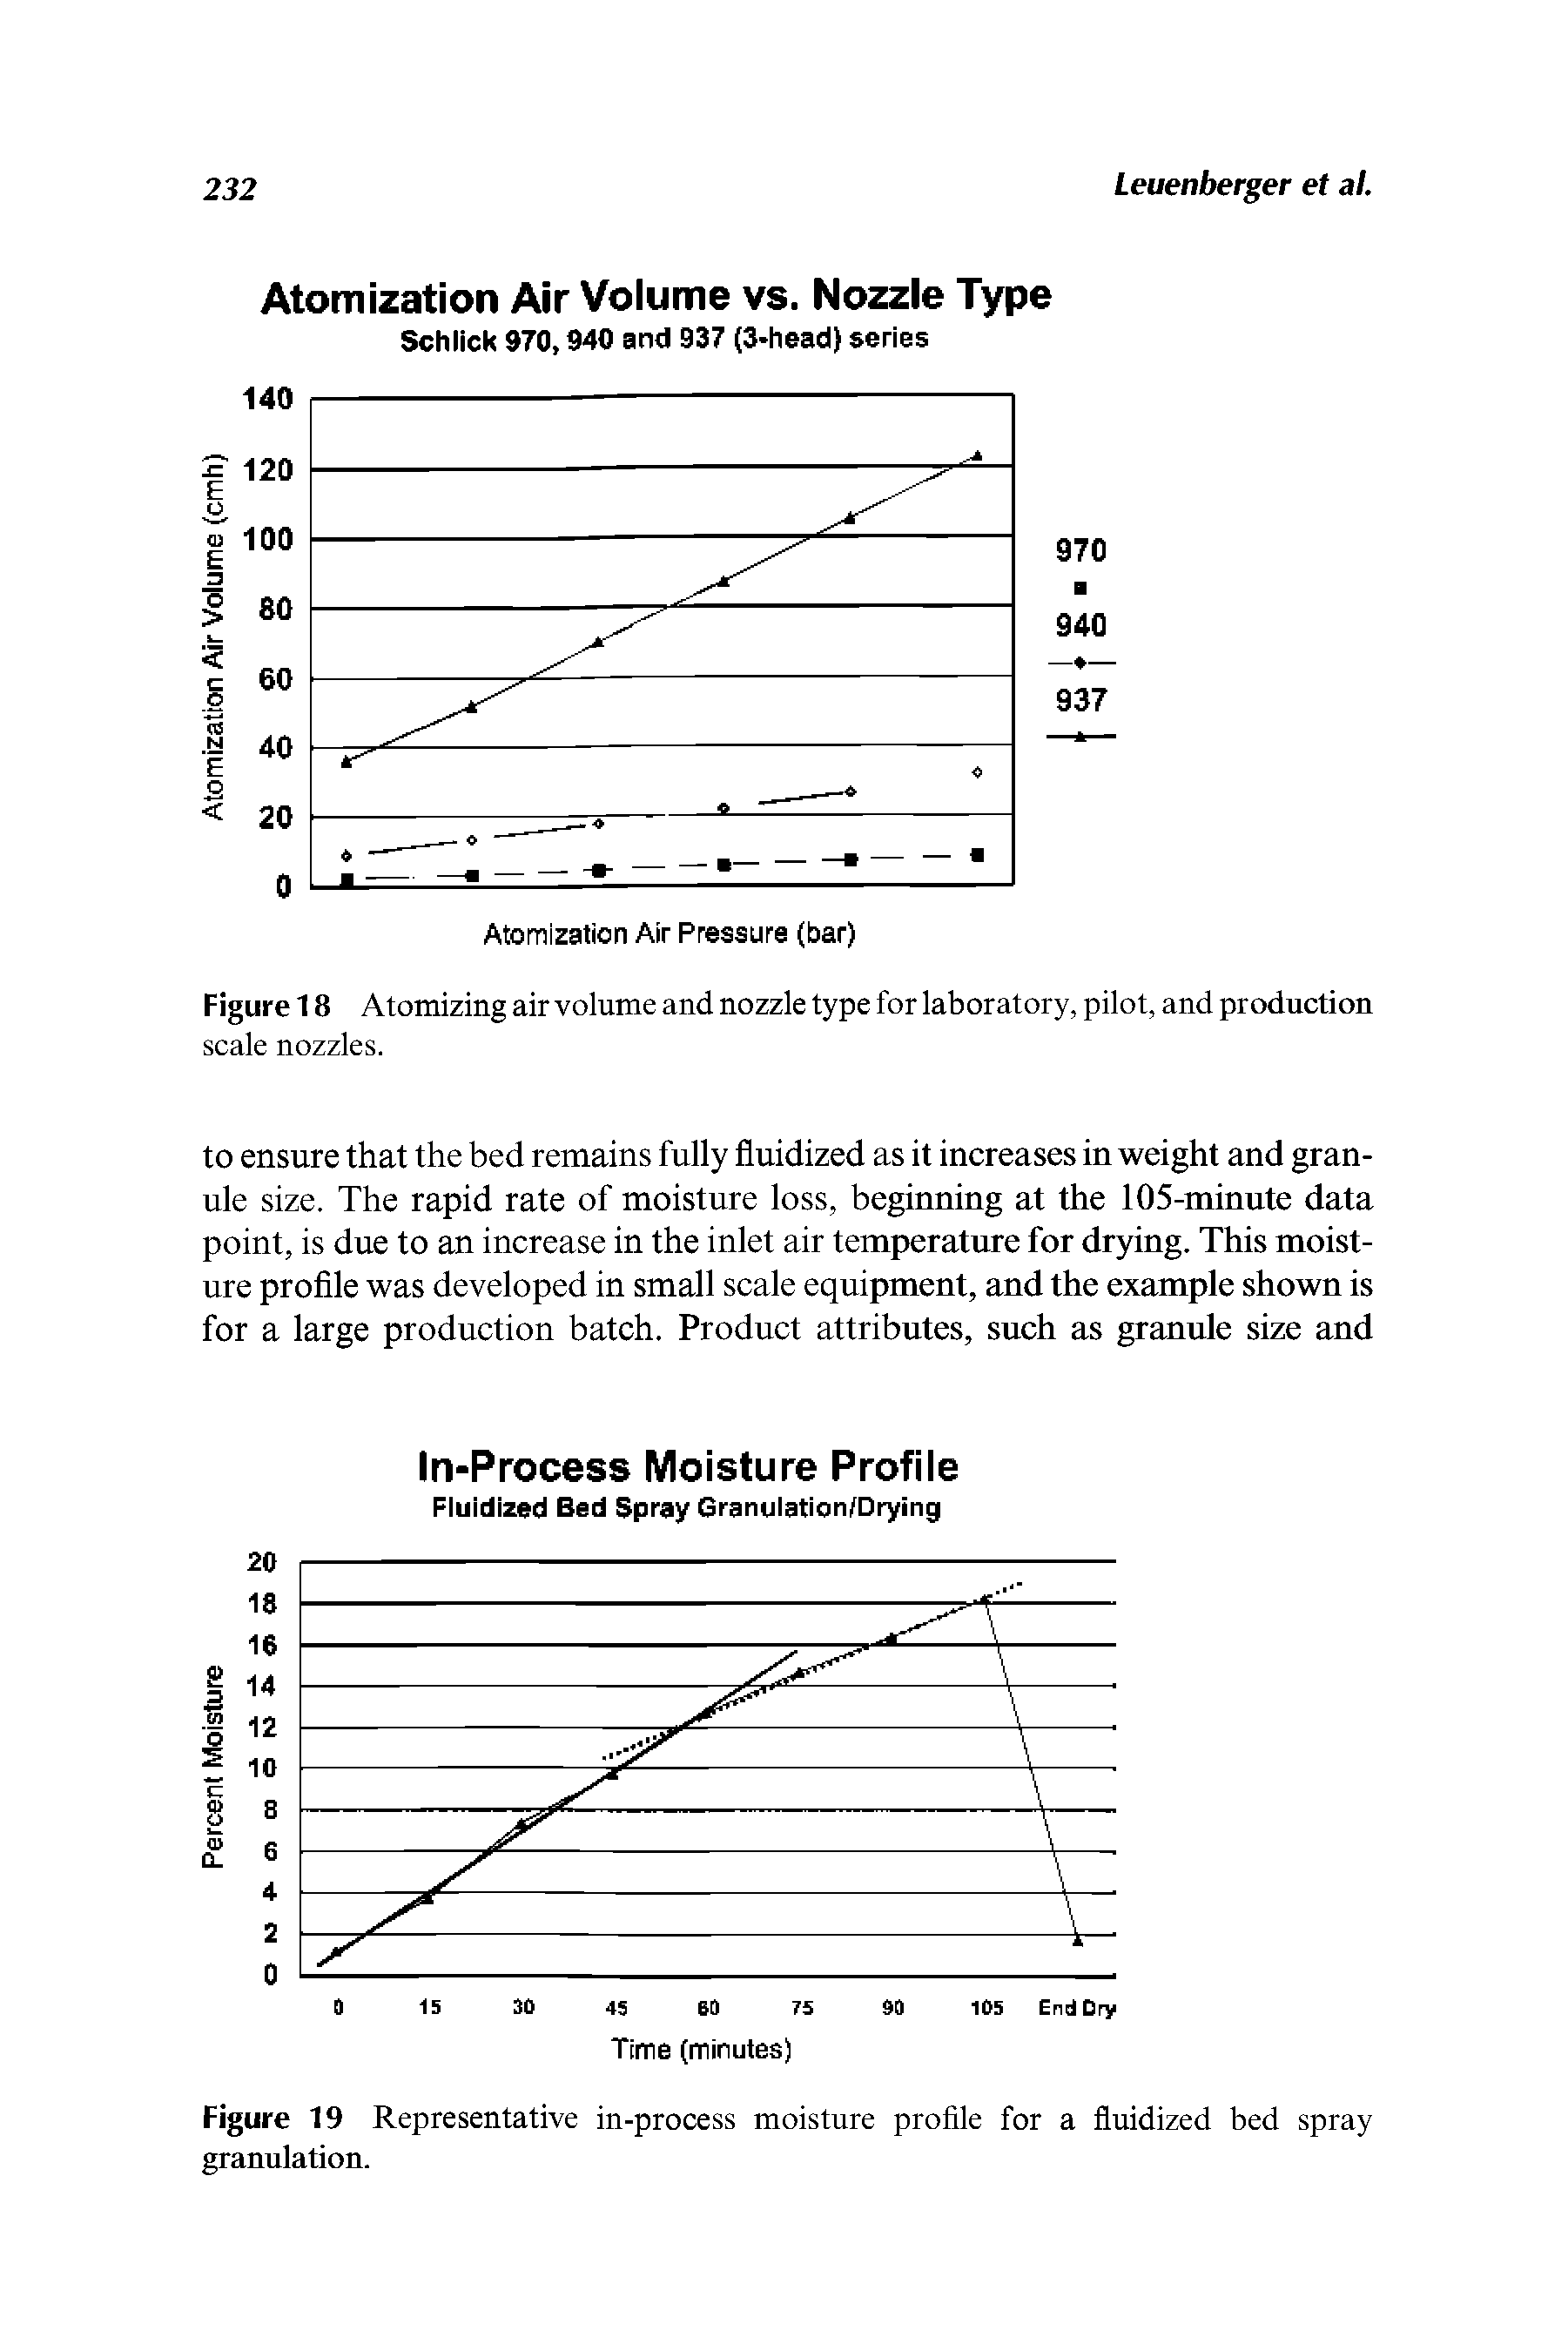 Figure 18 Atomizing air volume and nozzle type for laboratory, pilot, and production...